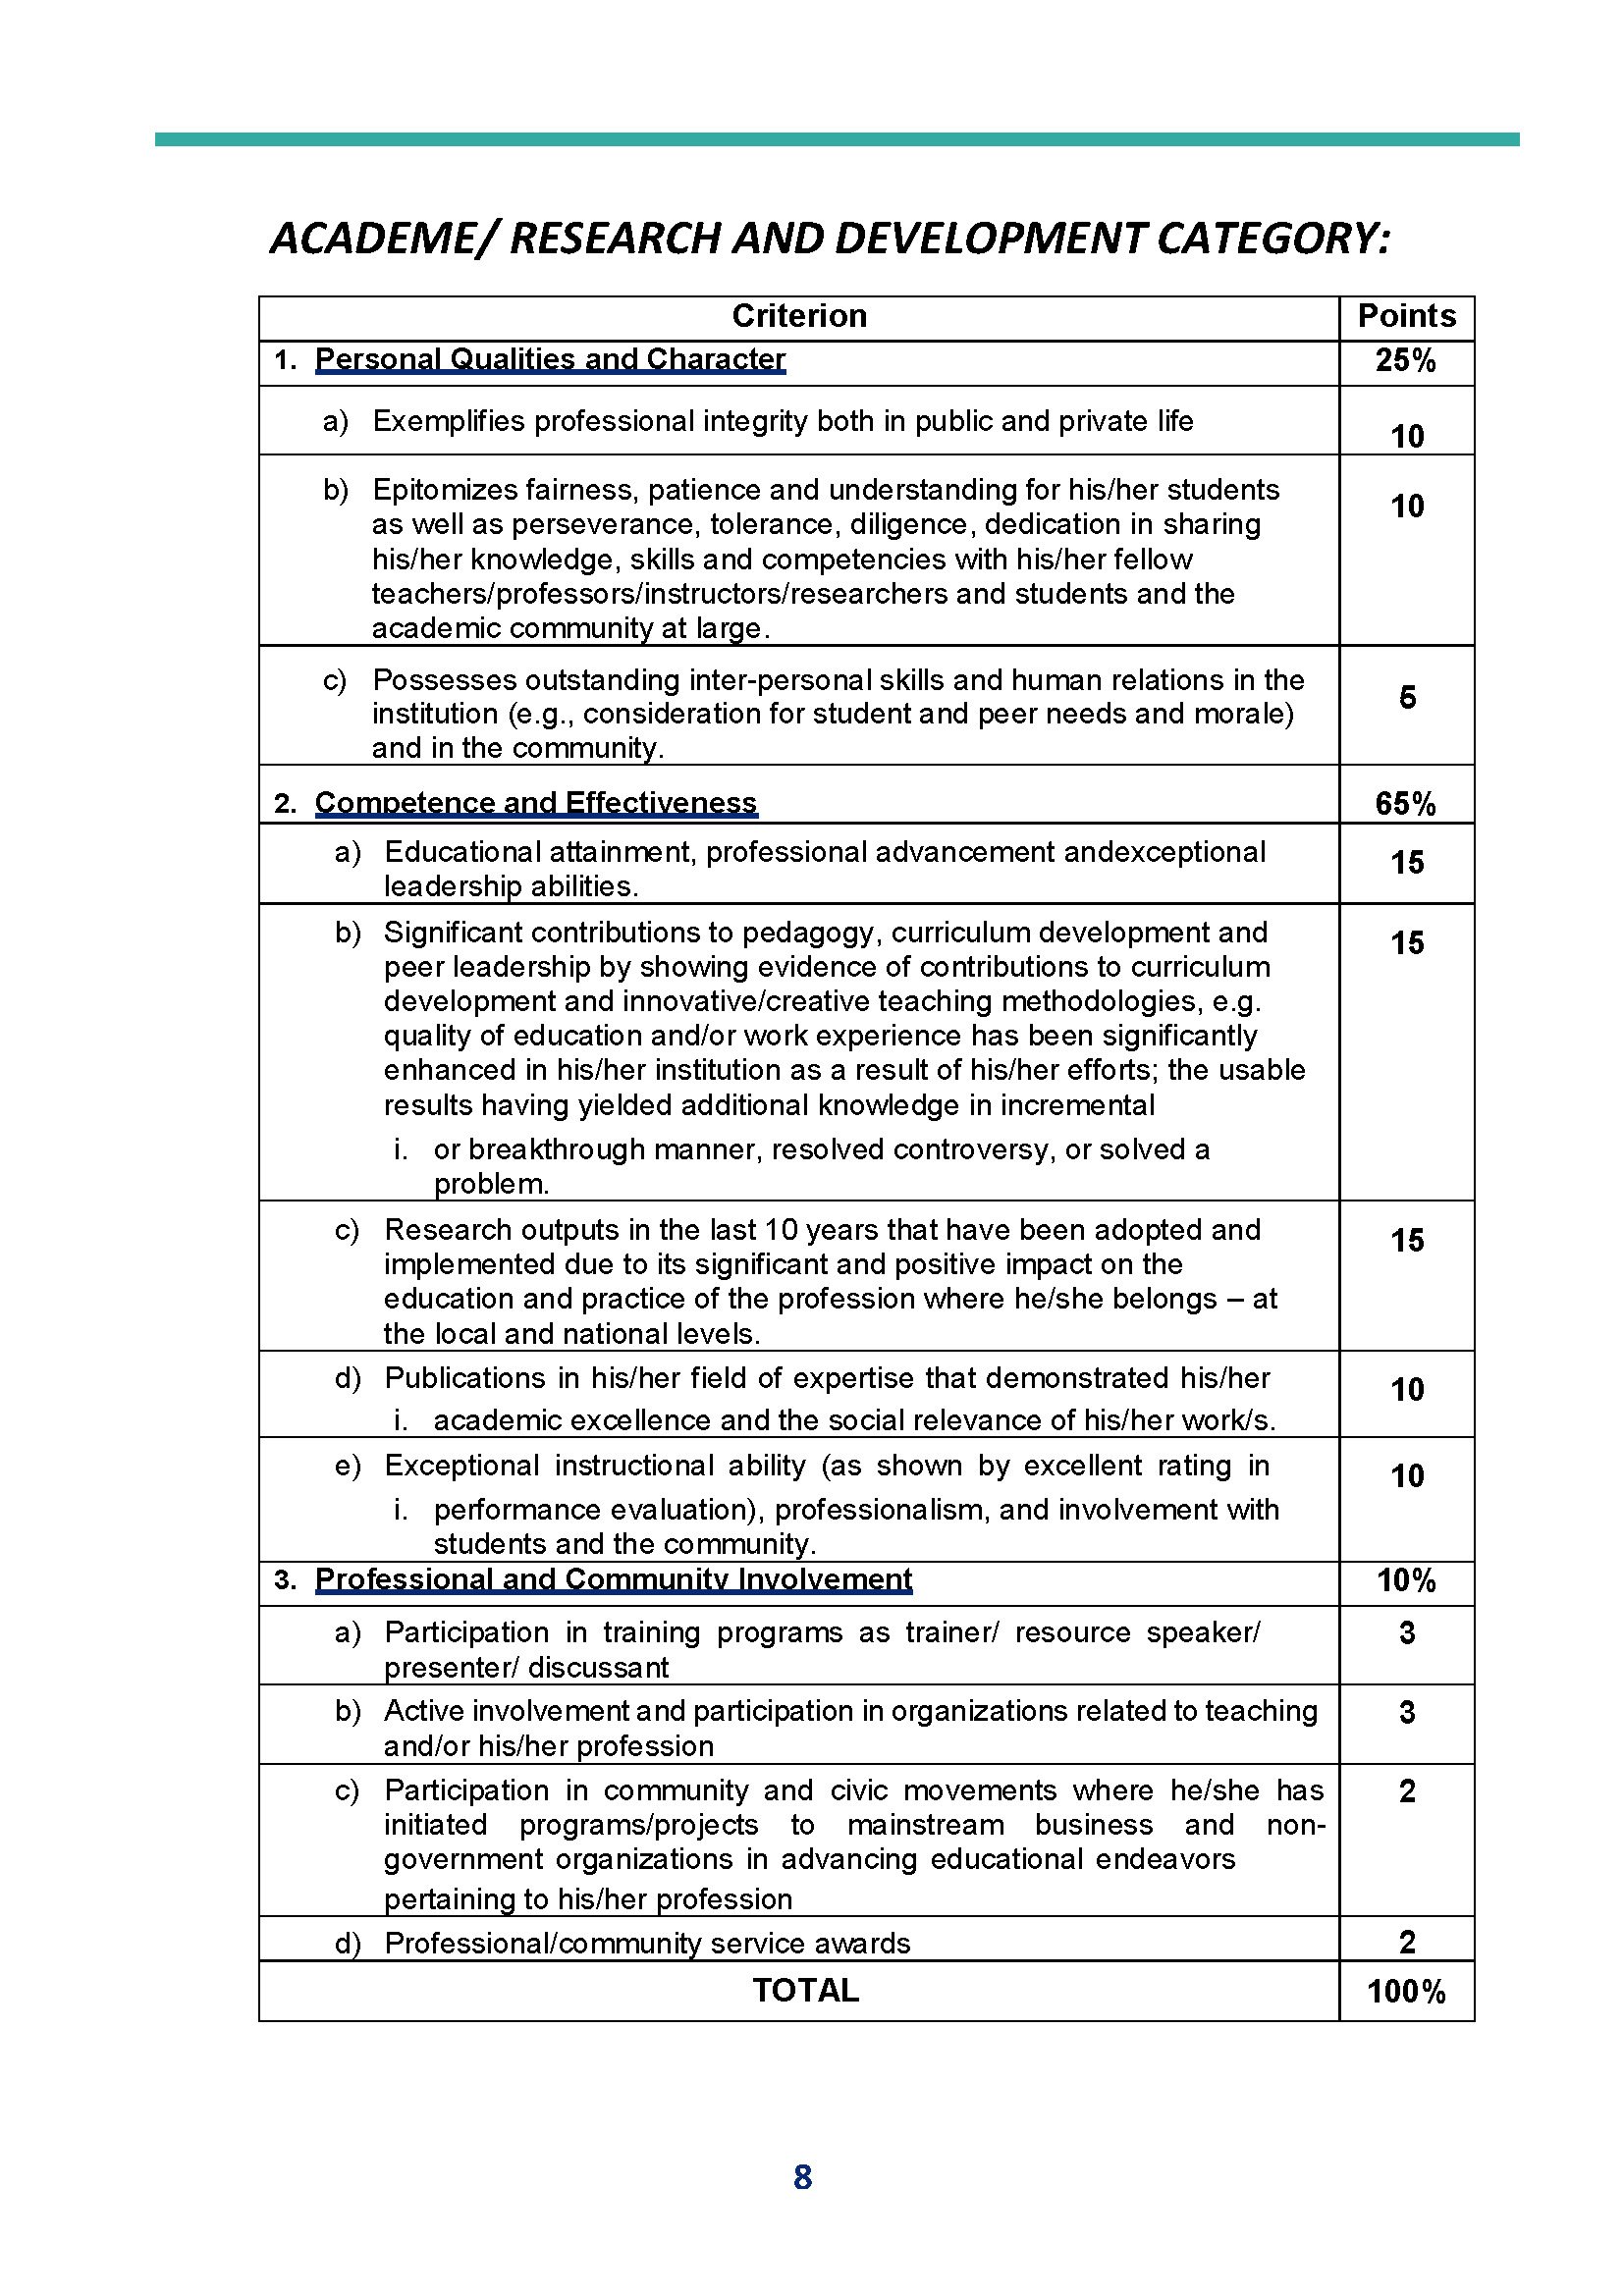 PFPA-Excellence-Awards-Guidelines-new (1)_Page_08.jpg